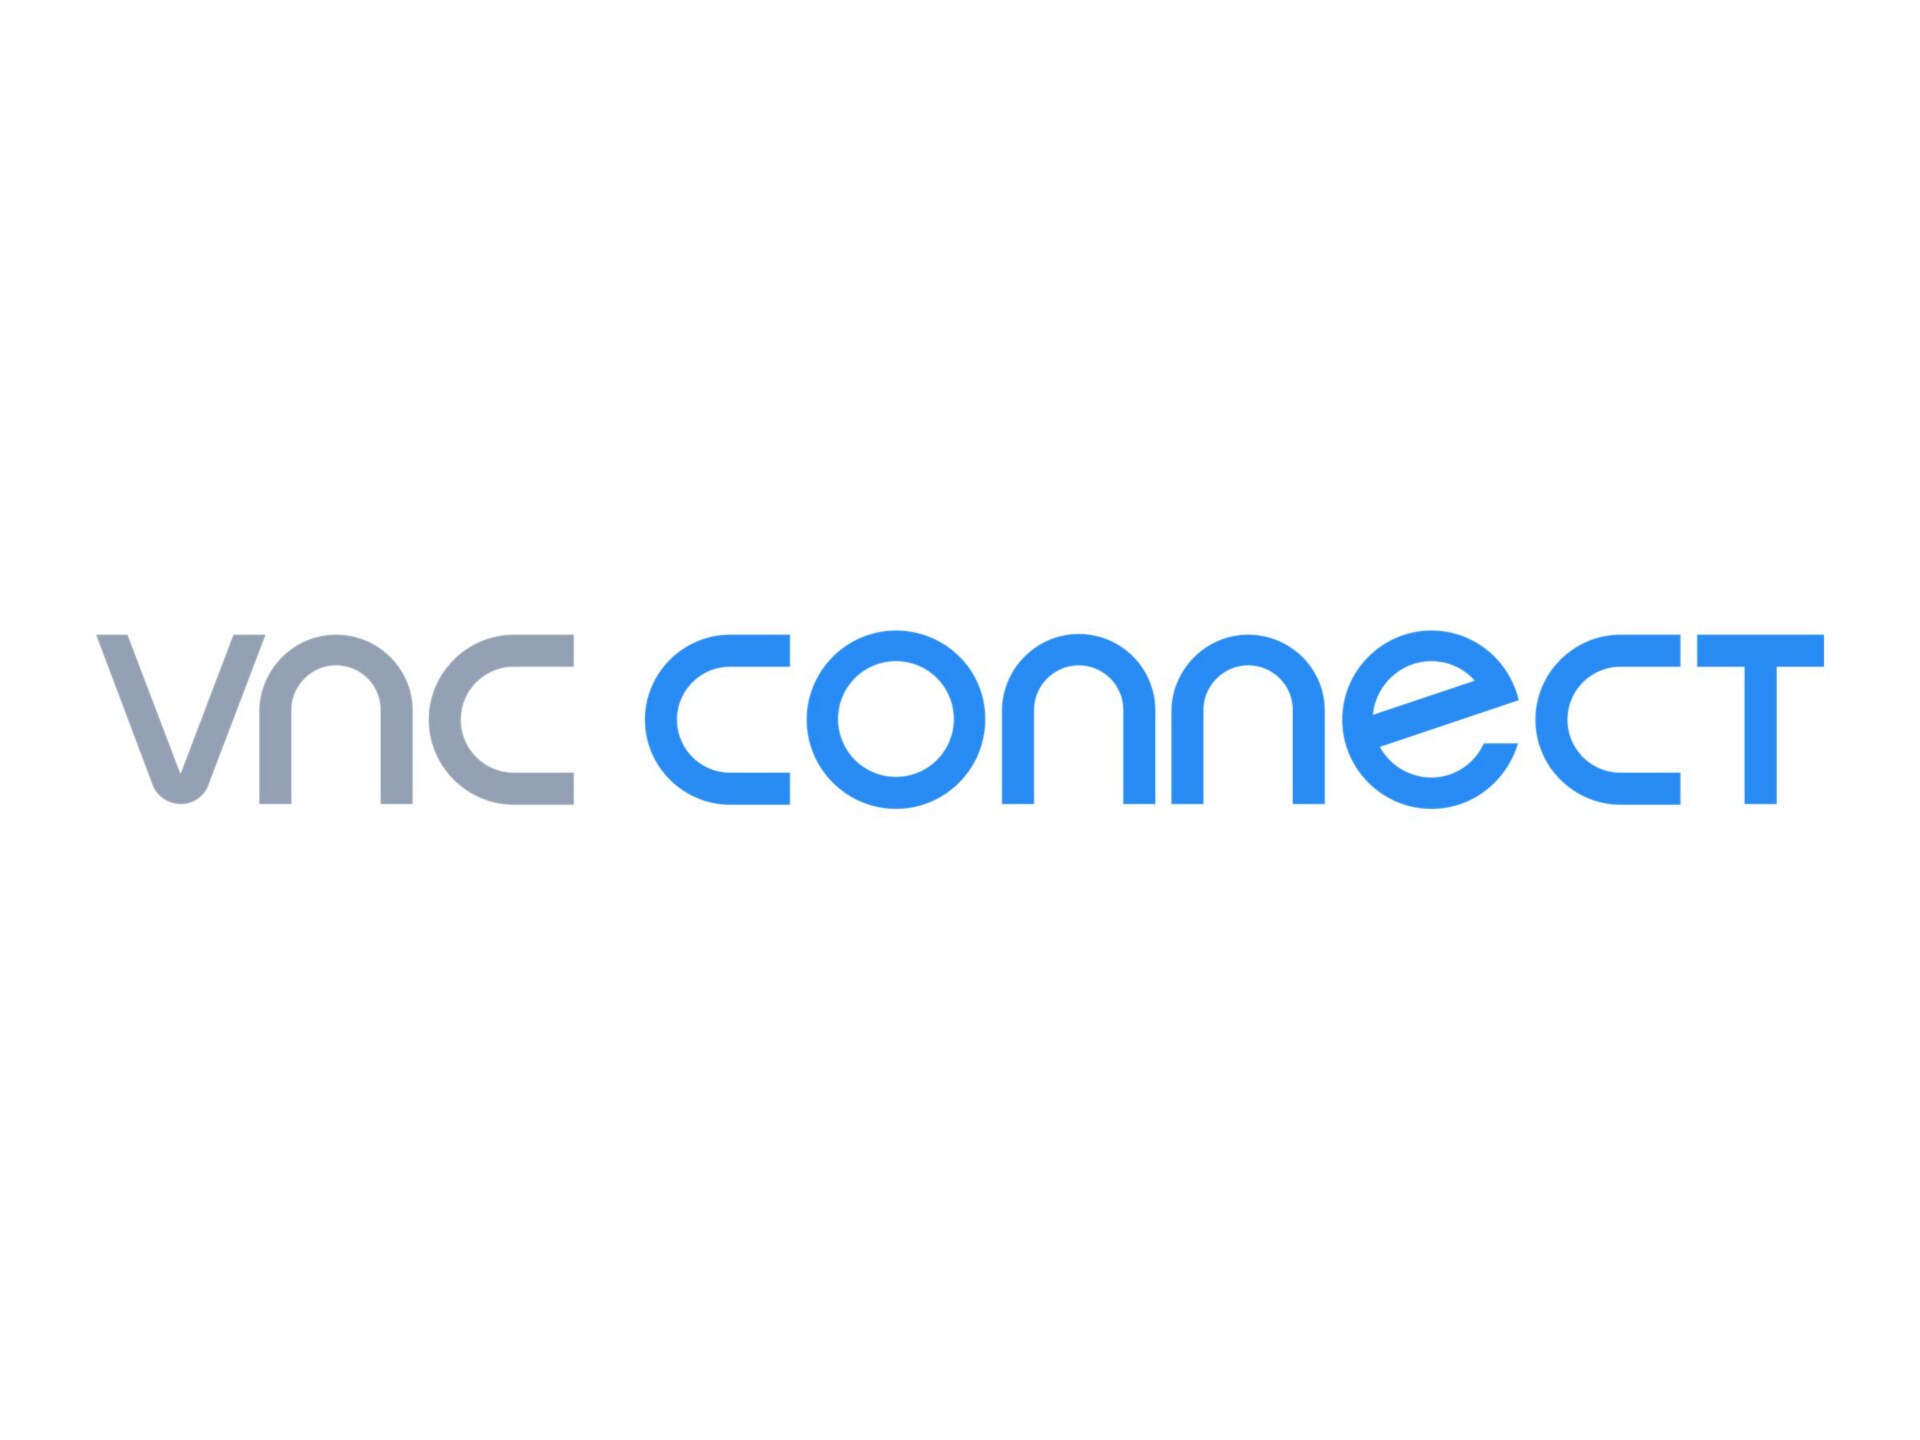 VNC Connect Enterprise - subscription license (1 year) - unlimited users, 5